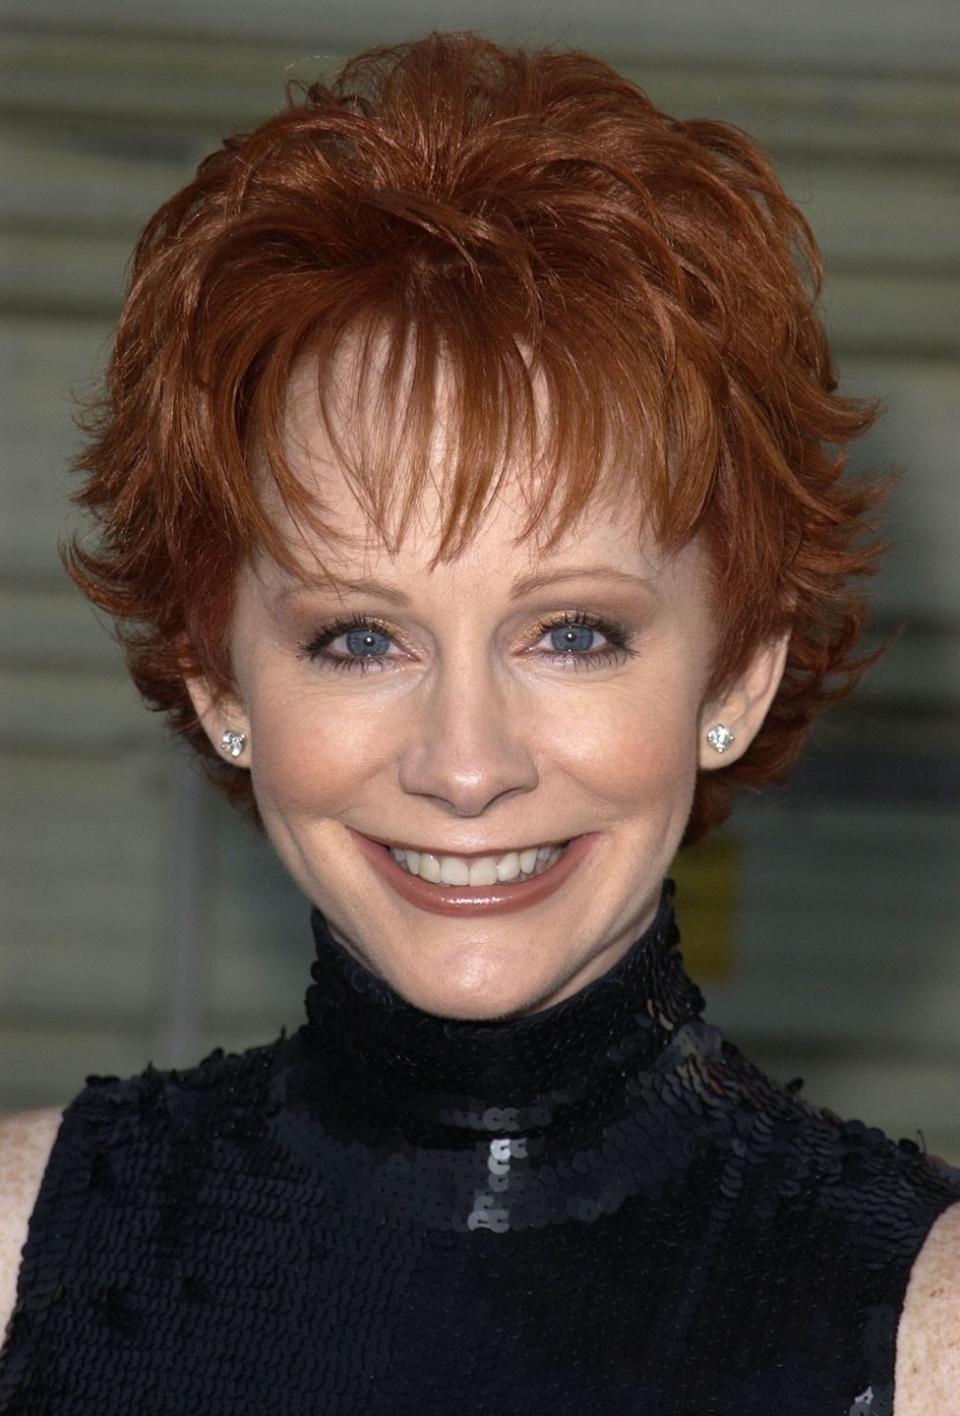 <p>Reba ditched her long curls in favor of a whimsical pixie cut that quickly caught on in 2001.</p>